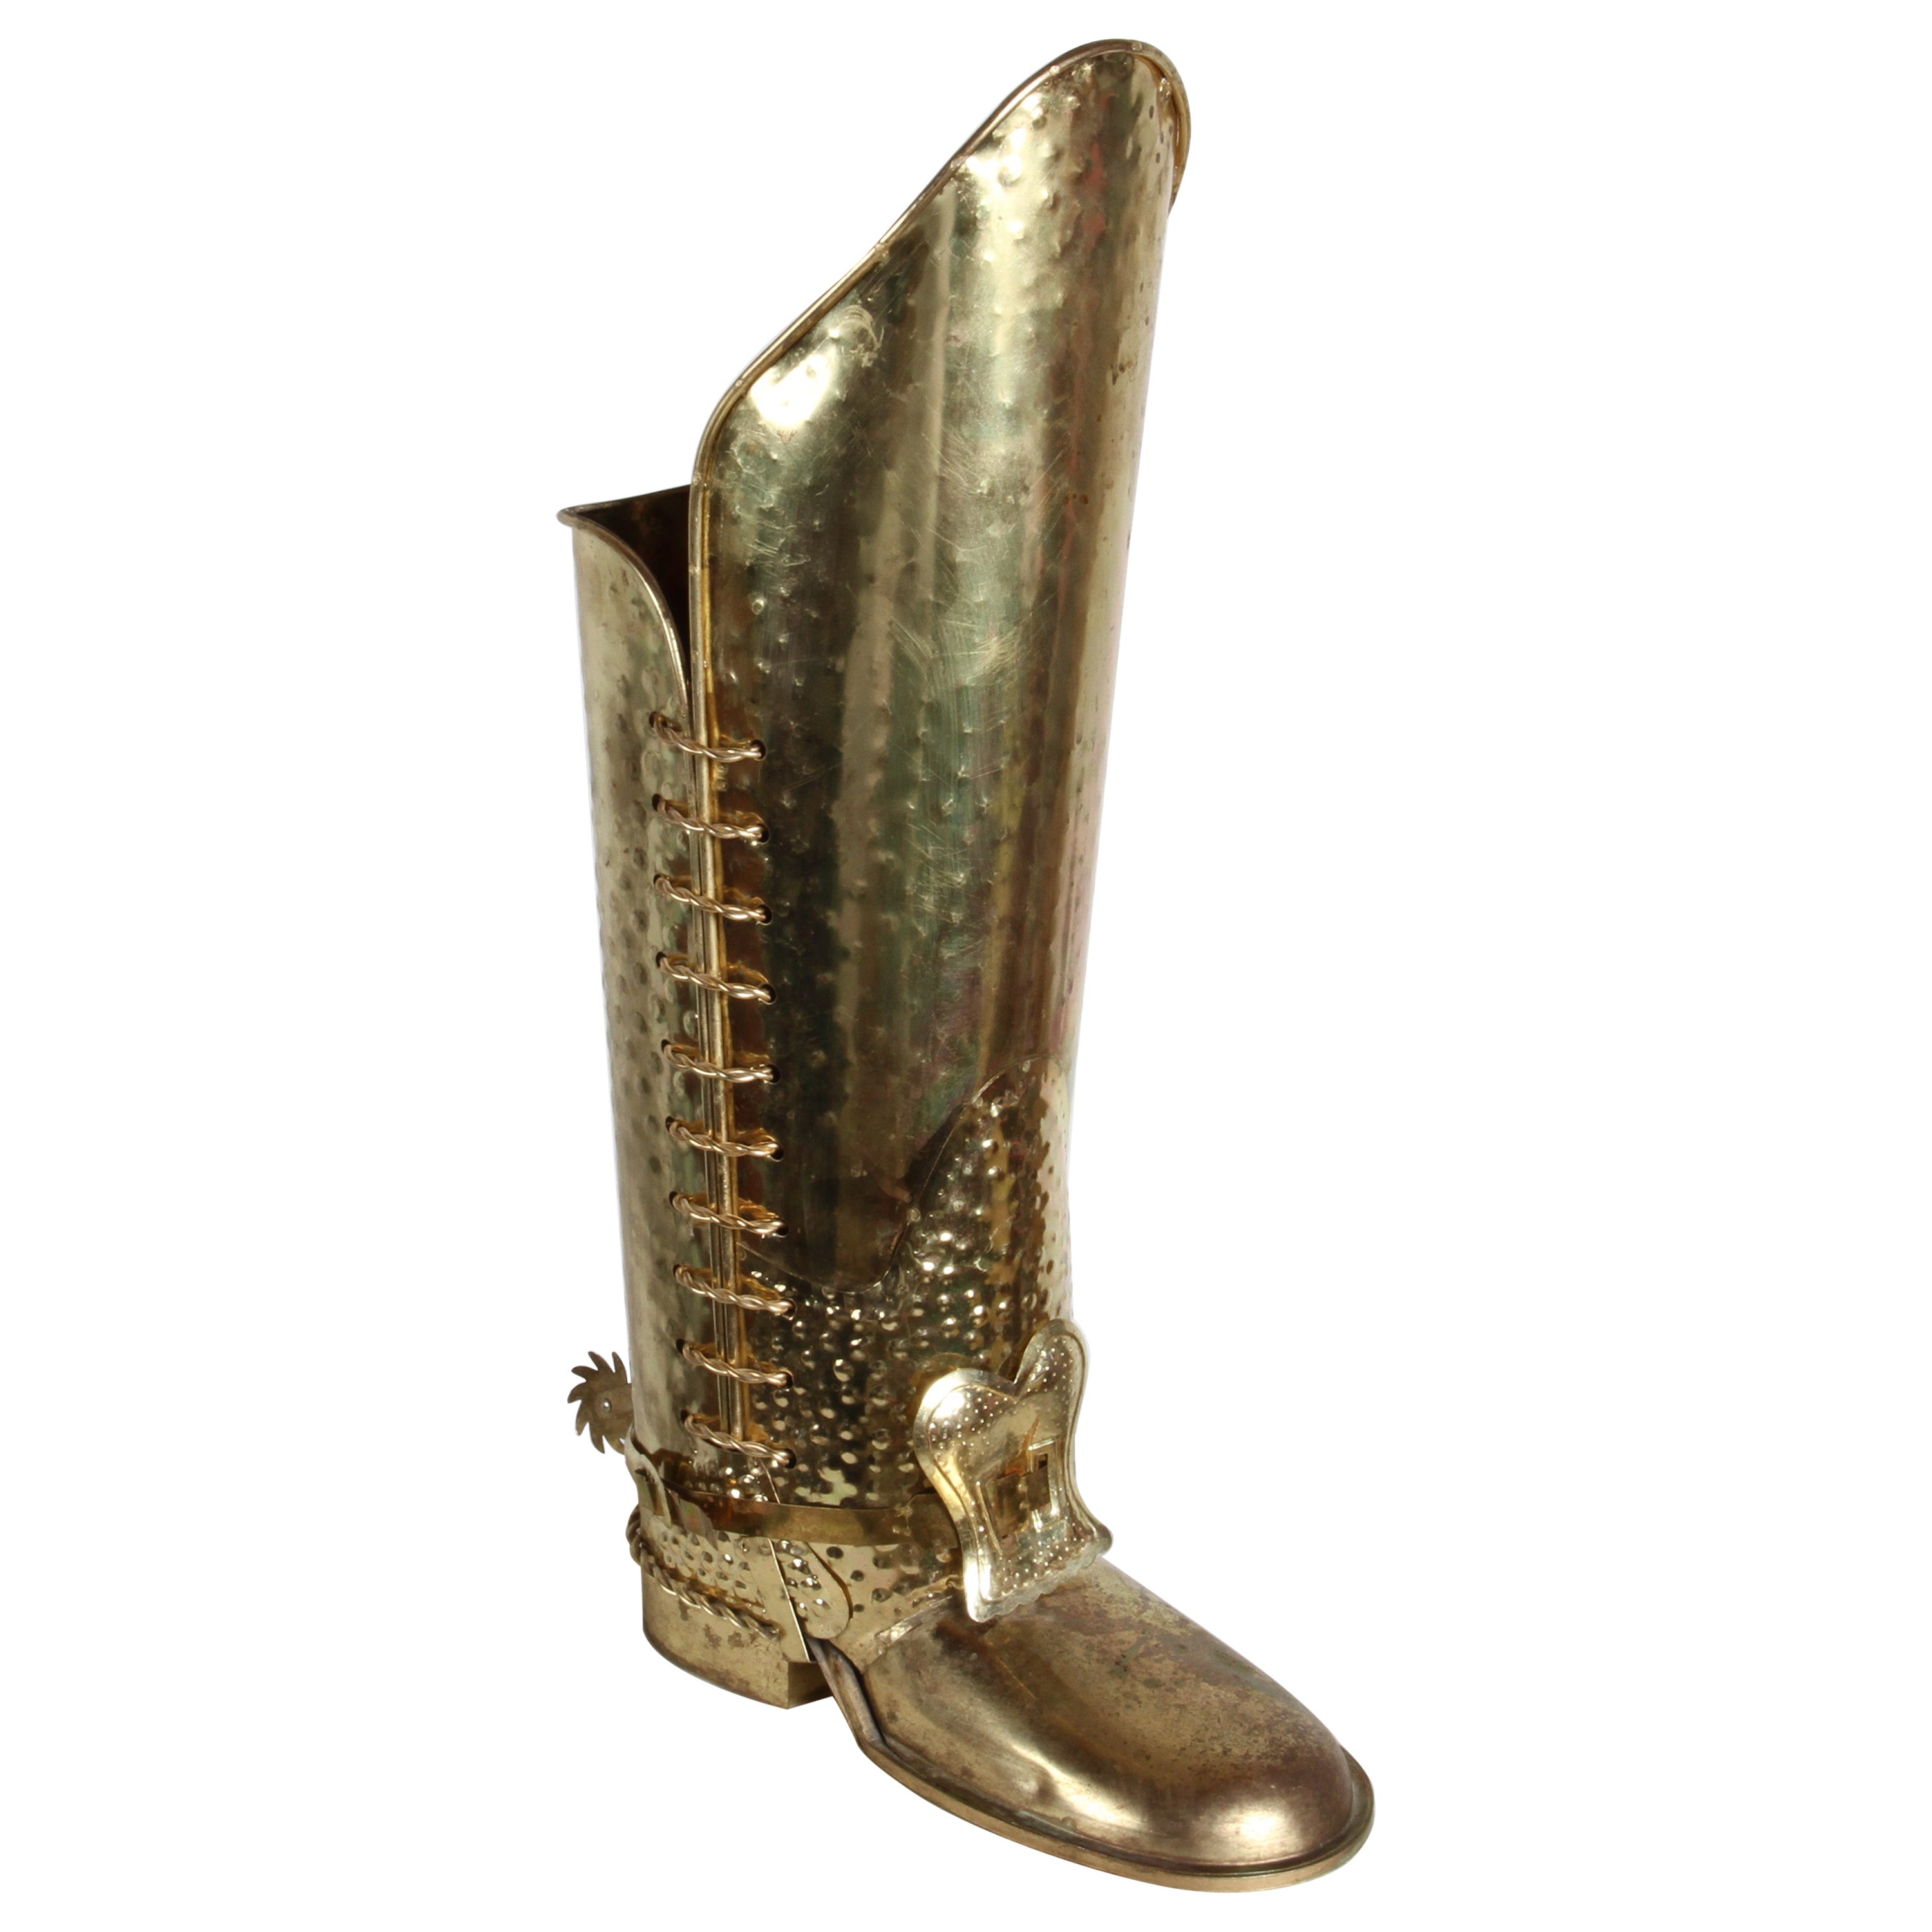 1960s Mid-20th Century Italian Hammered Brass Tall Boot Umbrella Stand with Spur For Sale